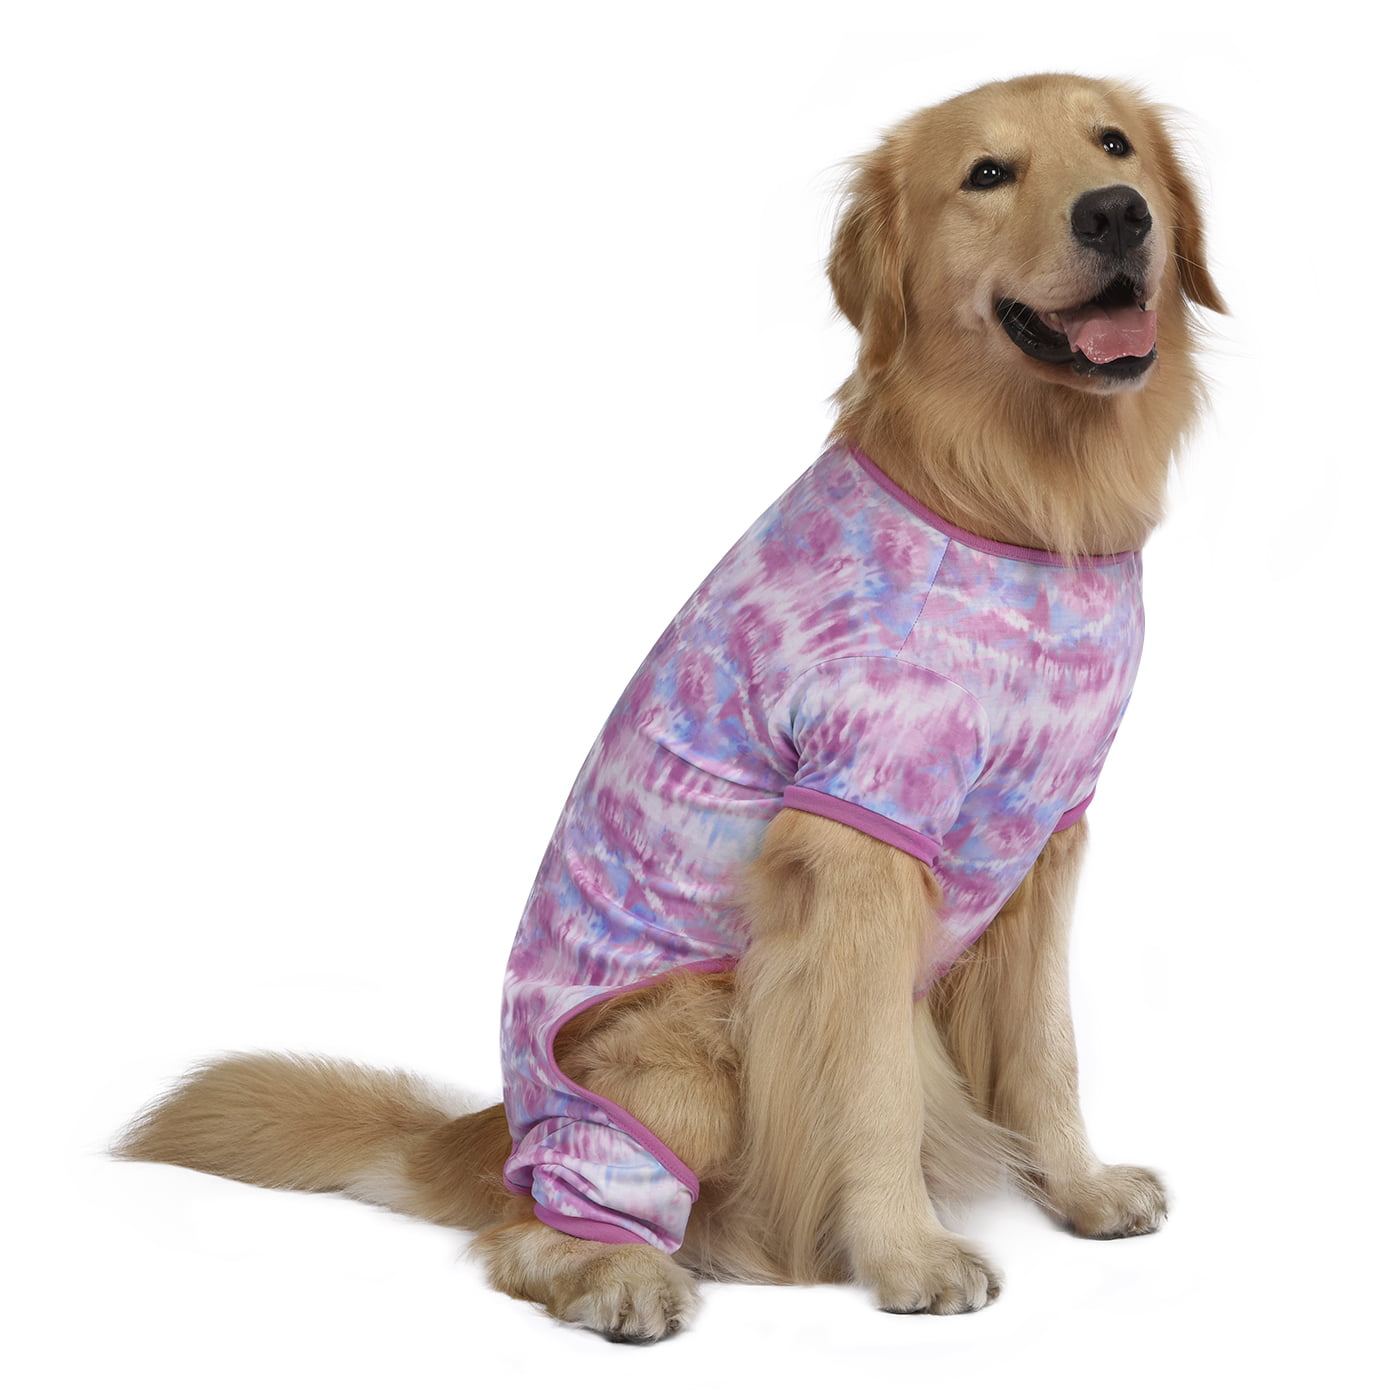 Full Belly 26 Chest 23.62,Back Length 13.96 , Pink Rainbow Dog Pajamas Jumpsuit for Medium Large Dogs,Lightweight Dog Pjs Clothes Apparel Onesies,Shirt for Large Size Dogs After Surgery